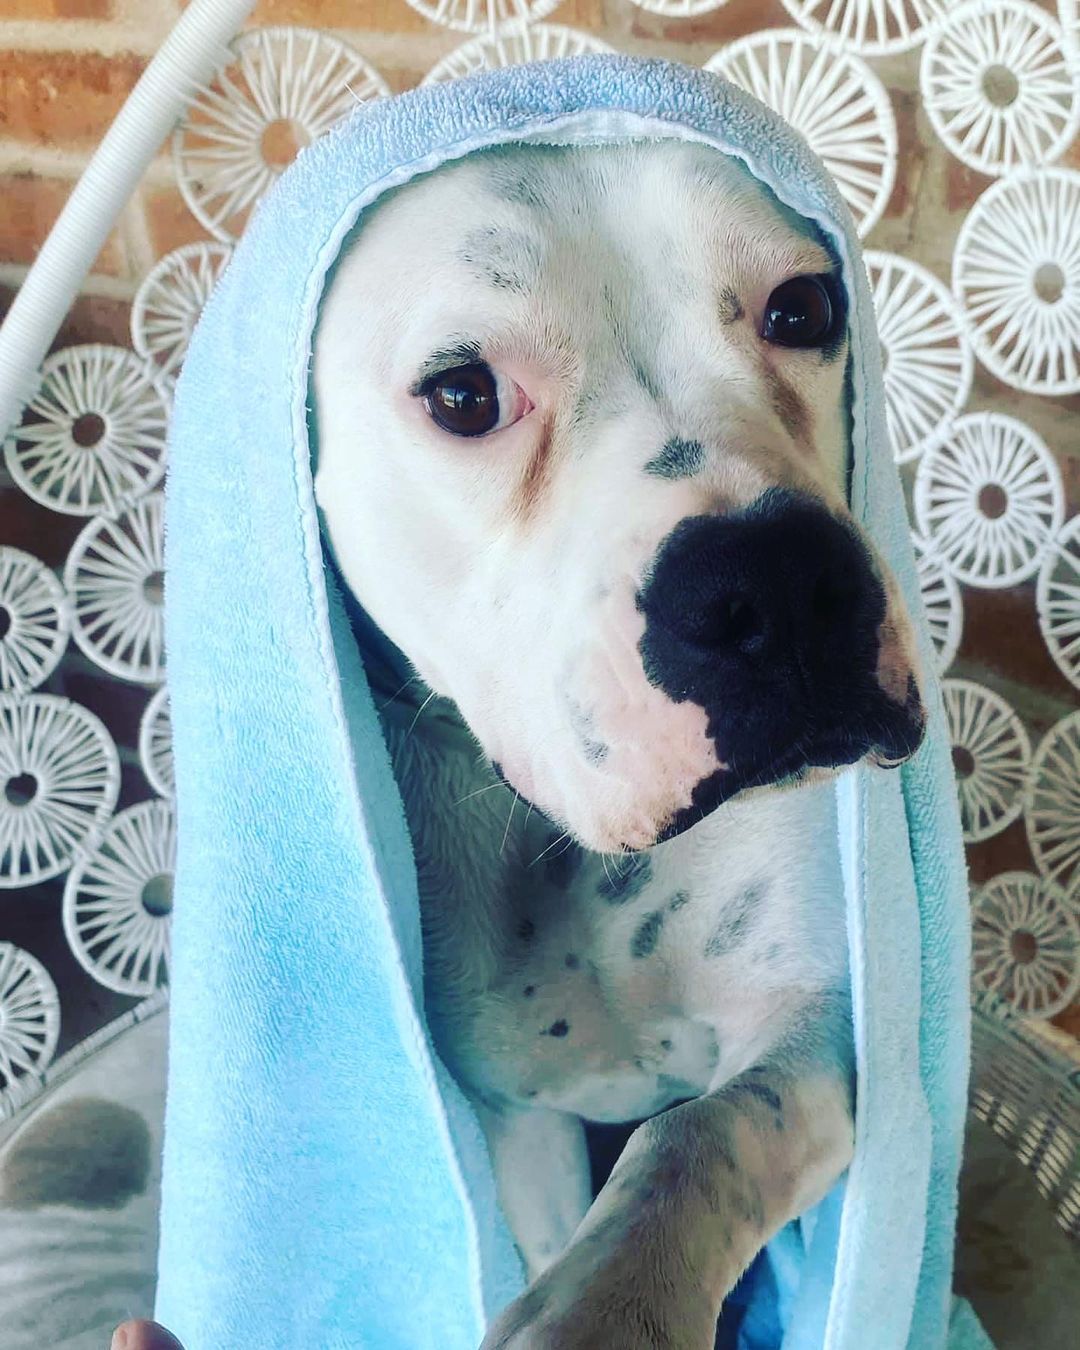 SPLISH, SPLASH💦🛁🧽 Luna’s takin’ a bath!!!🐶

Luna is clean, fresh and ready to be your one and only love bug. 

Please fill out an application to open up your heart and life to this sweetest of puppies❤️

https://www.shelterluv.com/matchme/foster/LHSR/Dog<a target='_blank' href='https://www.instagram.com/explore/tags/dog/'>#dog</a><a target='_blank' href='https://www.instagram.com/explore/tags/adoptadog/'>#adoptadog</a> <a target='_blank' href='https://www.instagram.com/explore/tags/adoptadogsavealife/'>#adoptadogsavealife</a> <a target='_blank' href='https://www.instagram.com/explore/tags/rescue/'>#rescue</a> <a target='_blank' href='https://www.instagram.com/explore/tags/rescuedog/'>#rescuedog</a> <a target='_blank' href='https://www.instagram.com/explore/tags/saveadog/'>#saveadog</a> <a target='_blank' href='https://www.instagram.com/explore/tags/saveadogkeepyours/'>#saveadogkeepyours</a> <a target='_blank' href='https://www.instagram.com/explore/tags/helpluna/'>#helpluna</a> <a target='_blank' href='https://www.instagram.com/explore/tags/luna/'>#luna</a> <a target='_blank' href='https://www.instagram.com/explore/tags/loveluna/'>#loveluna</a> <a target='_blank' href='https://www.instagram.com/explore/tags/lucyshoperescue/'>#lucyshoperescue</a> 

https://www.shelterluv.com/matchme/adopt/LHSR/Dog